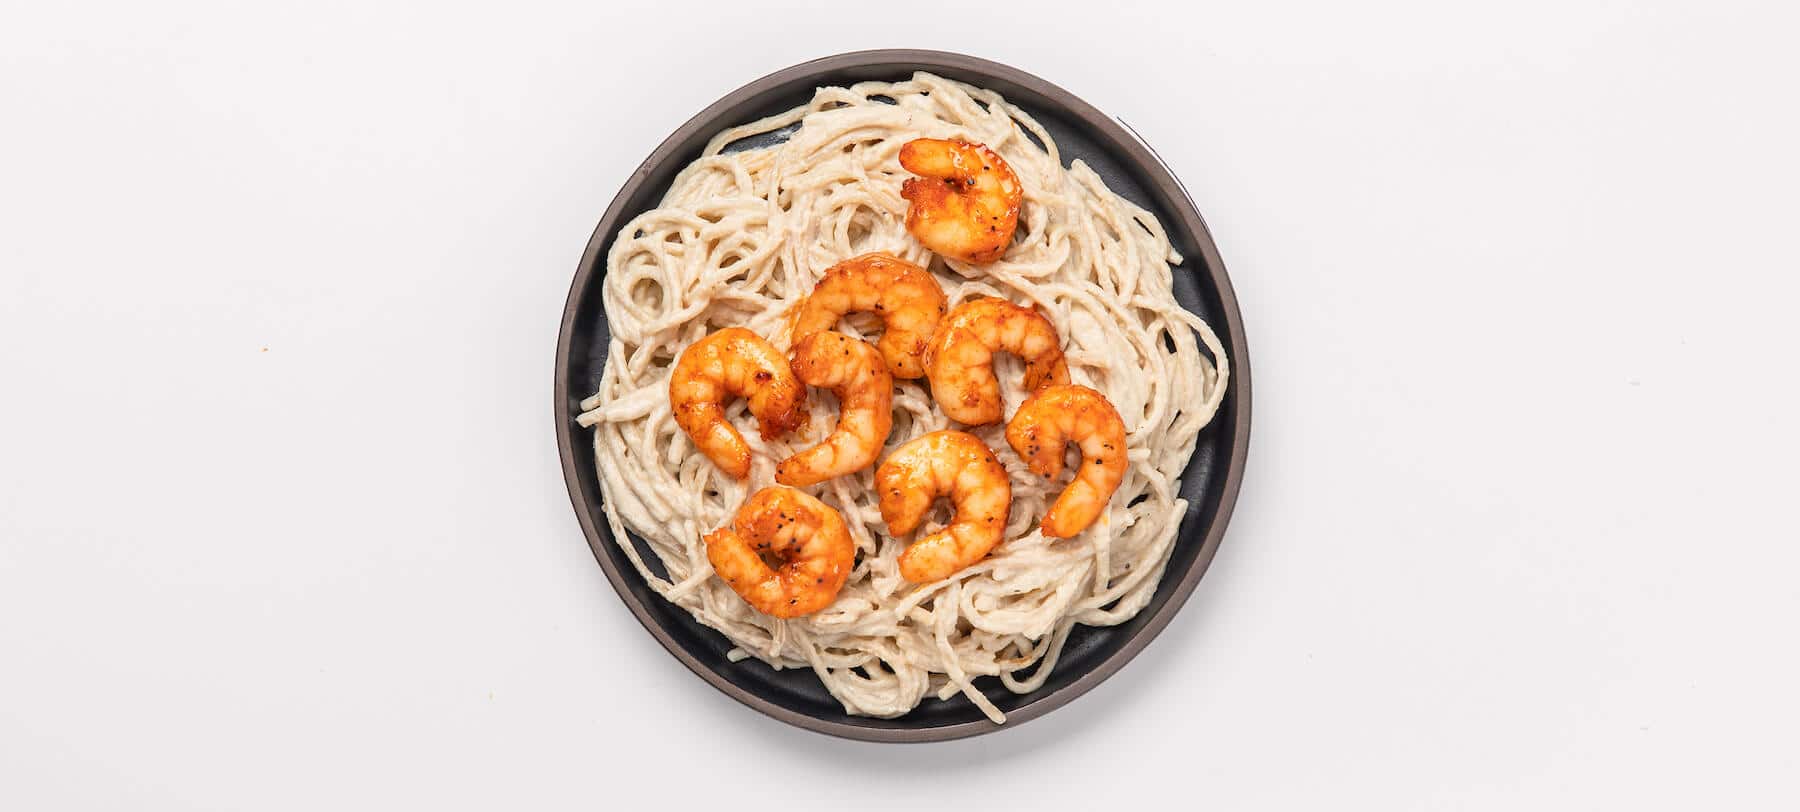 Shrimp alfredo in a bowl on a white background